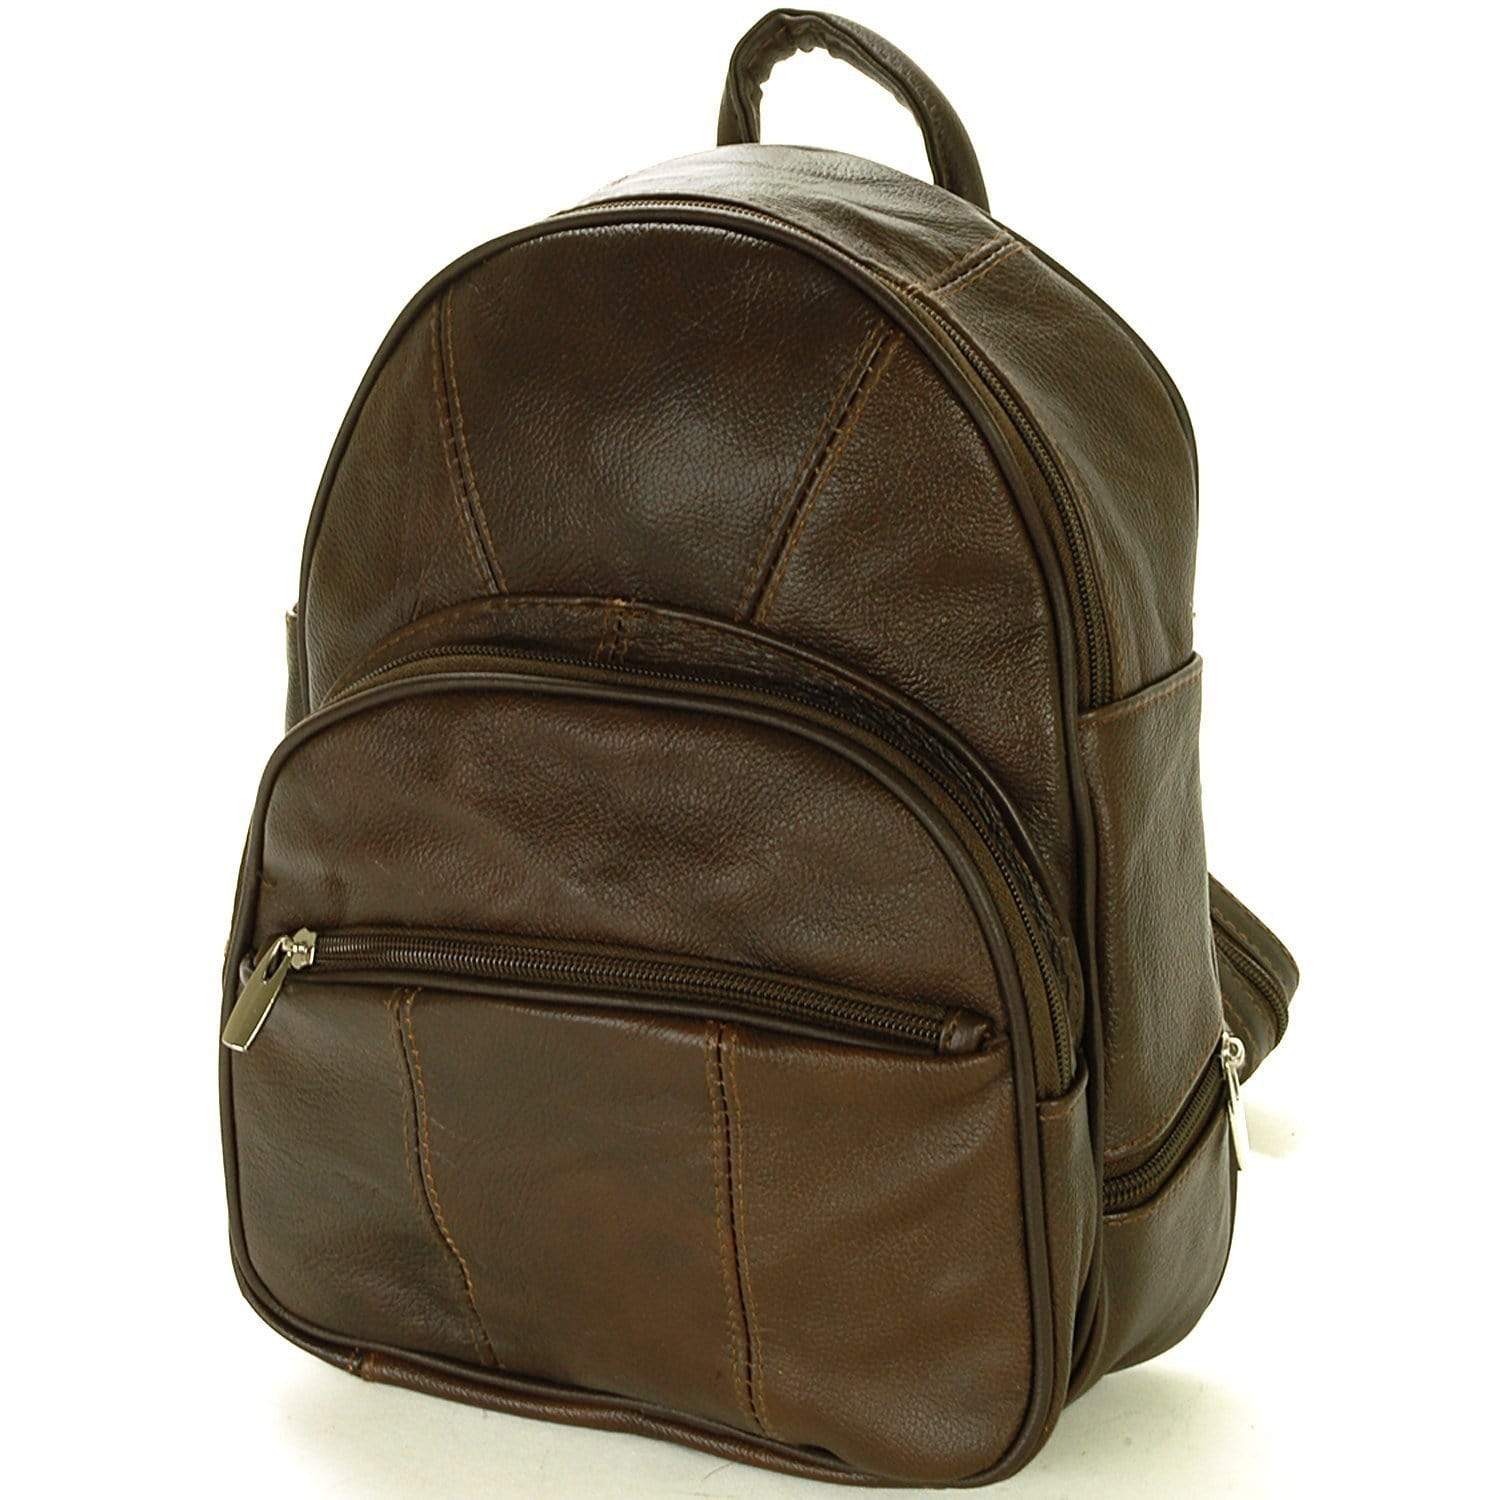 Brown Leather Backpack Purse Mid Size & Convertible Strap â Improving Lifestyles